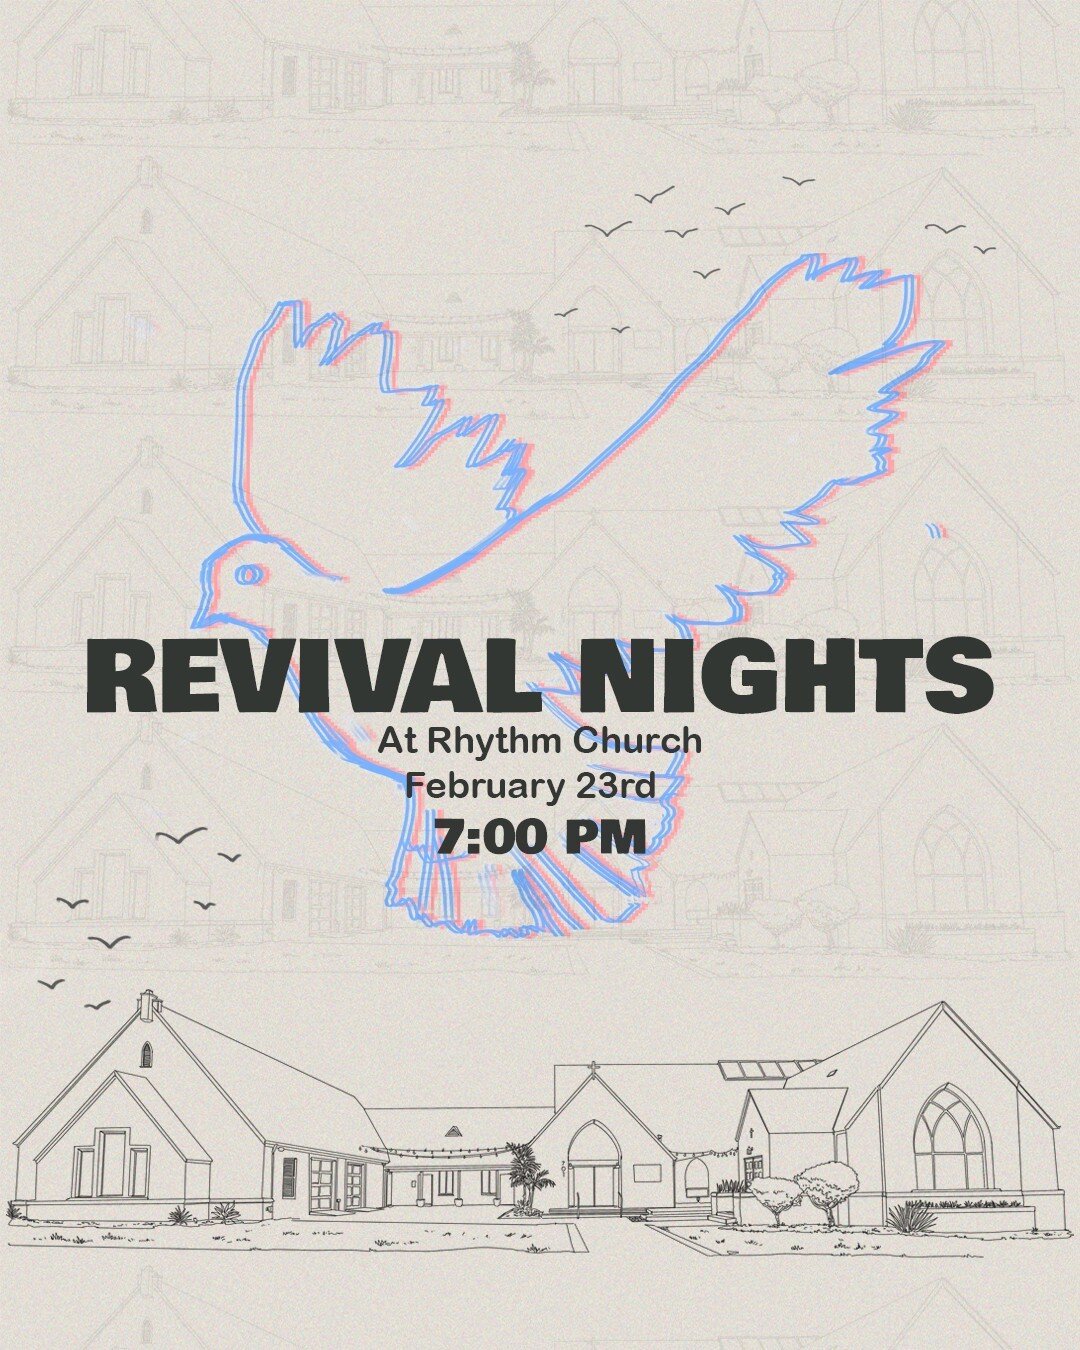 🌟✨ Join Us For Our Next Revival Nights at Rhythm Church! ✨🙏

Join Rhythm church and experience the power of worship, prayer, and spiritual awakening at our special Revival Nights! As we continue our Revival Night series in the month of February, co